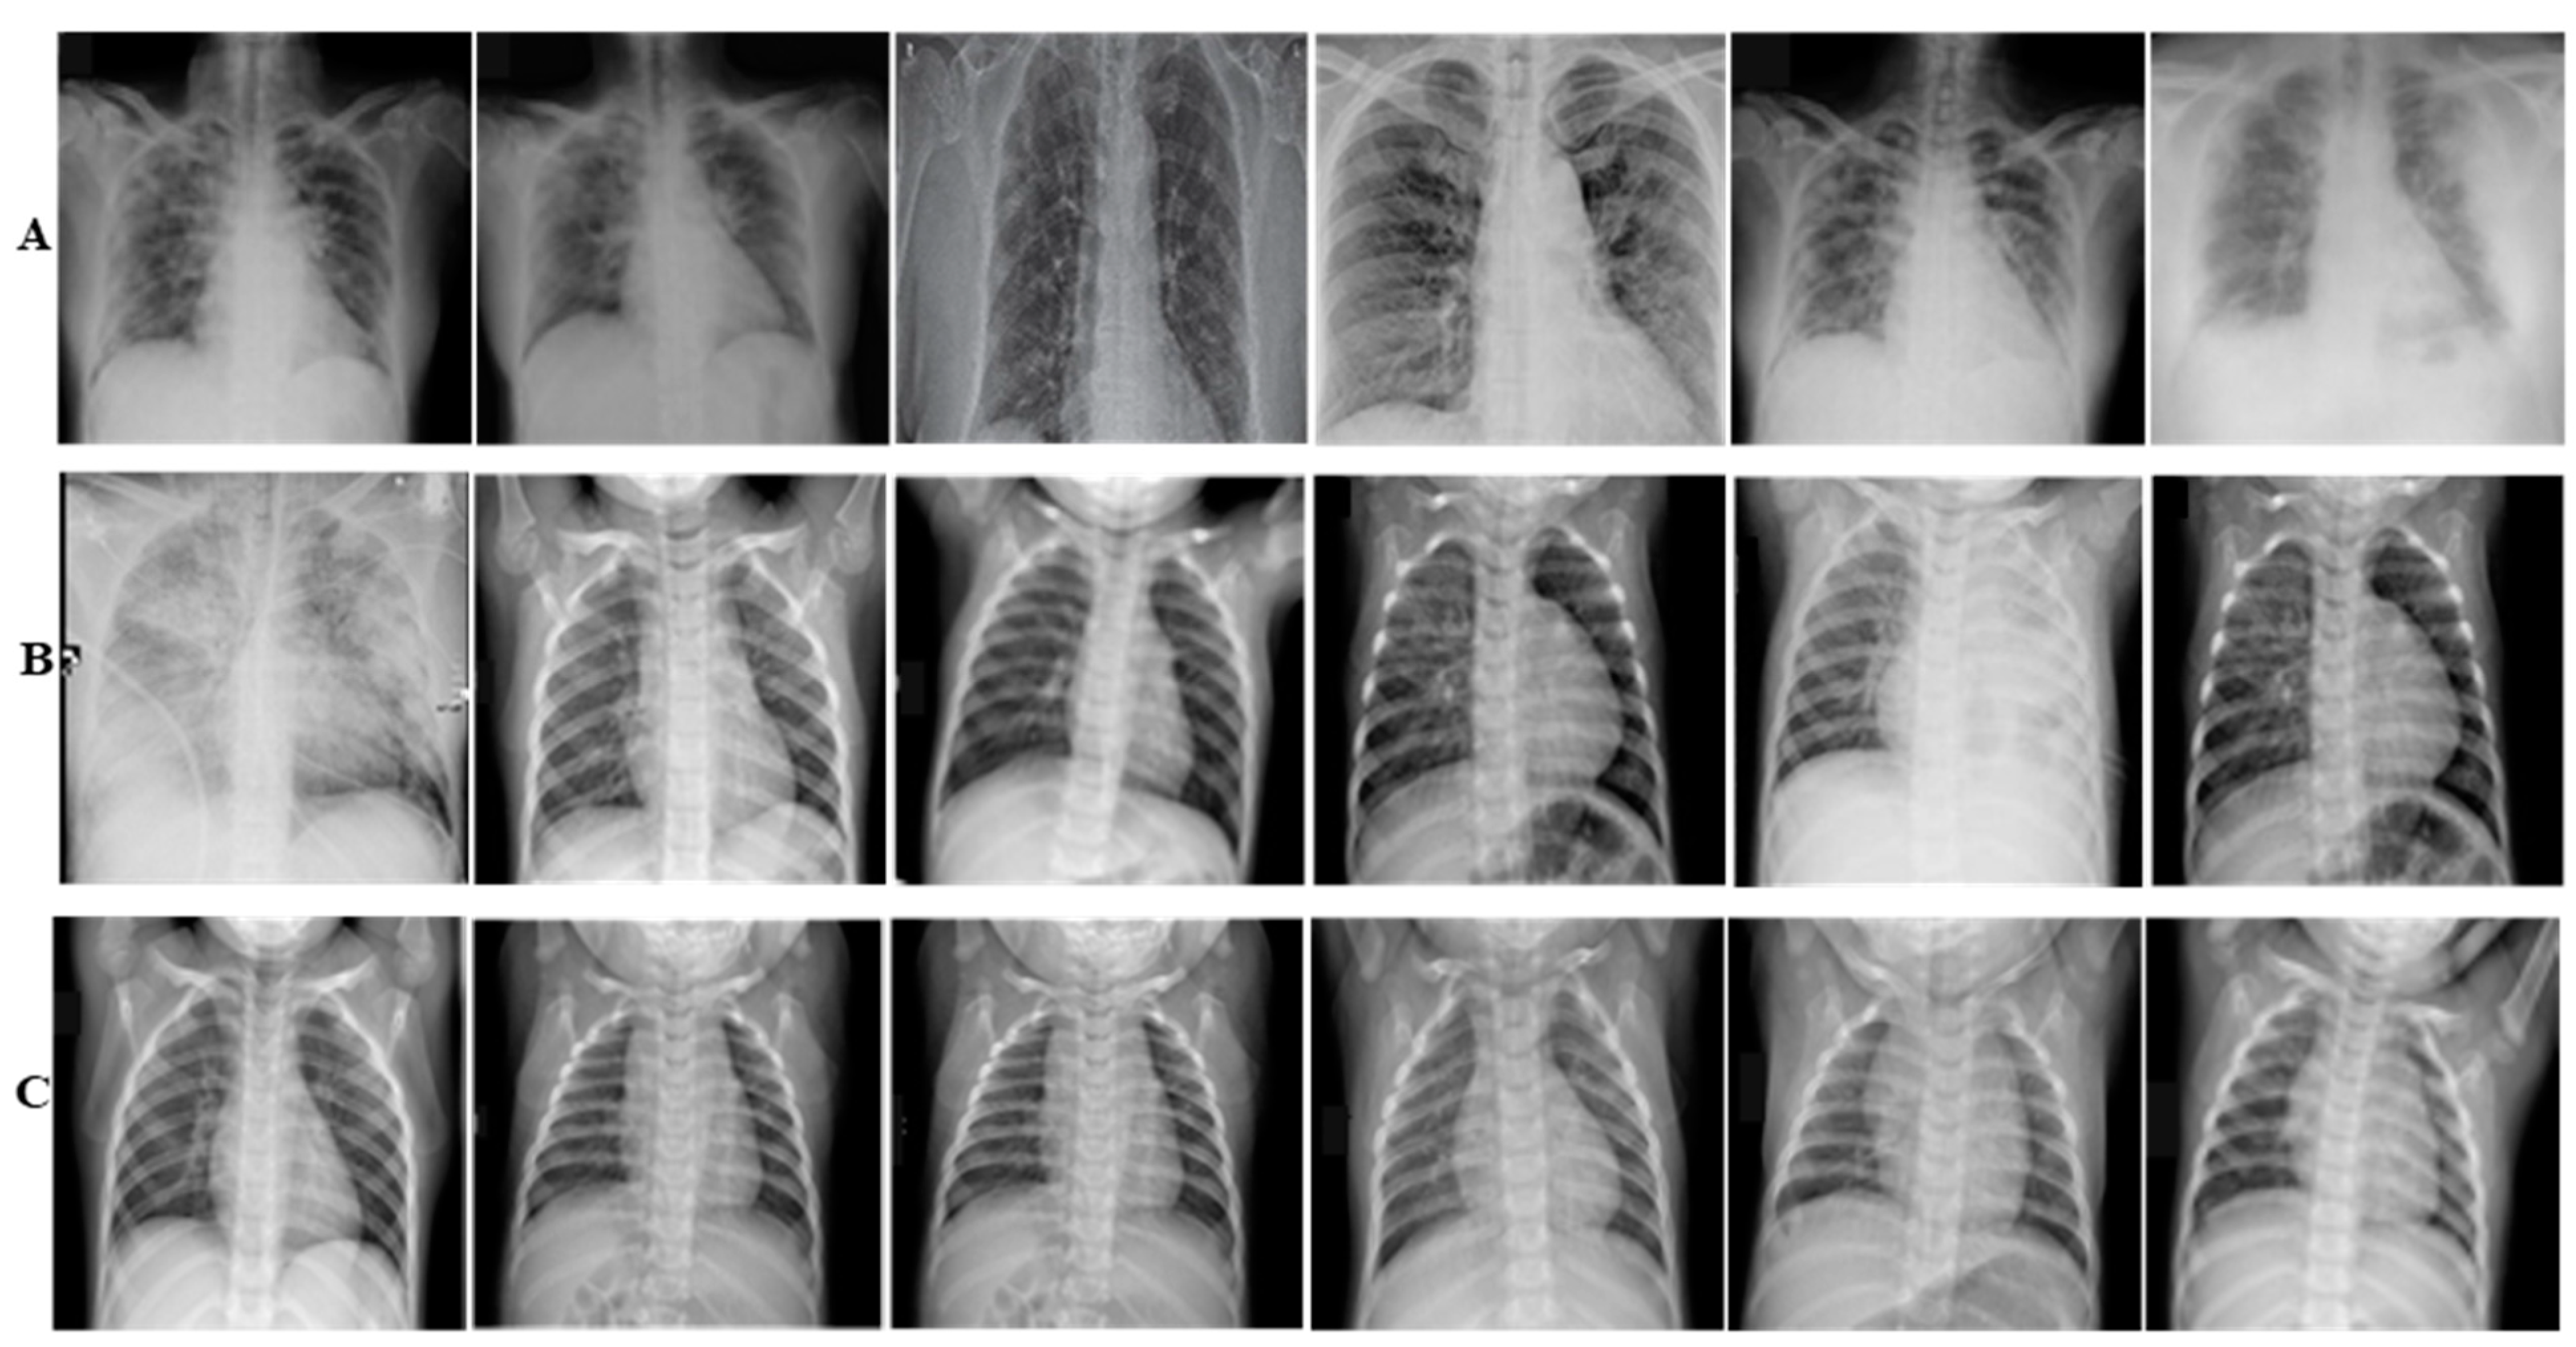 Diagnostics | Free Full-Text | COVID-19 Detection in Chest X-ray